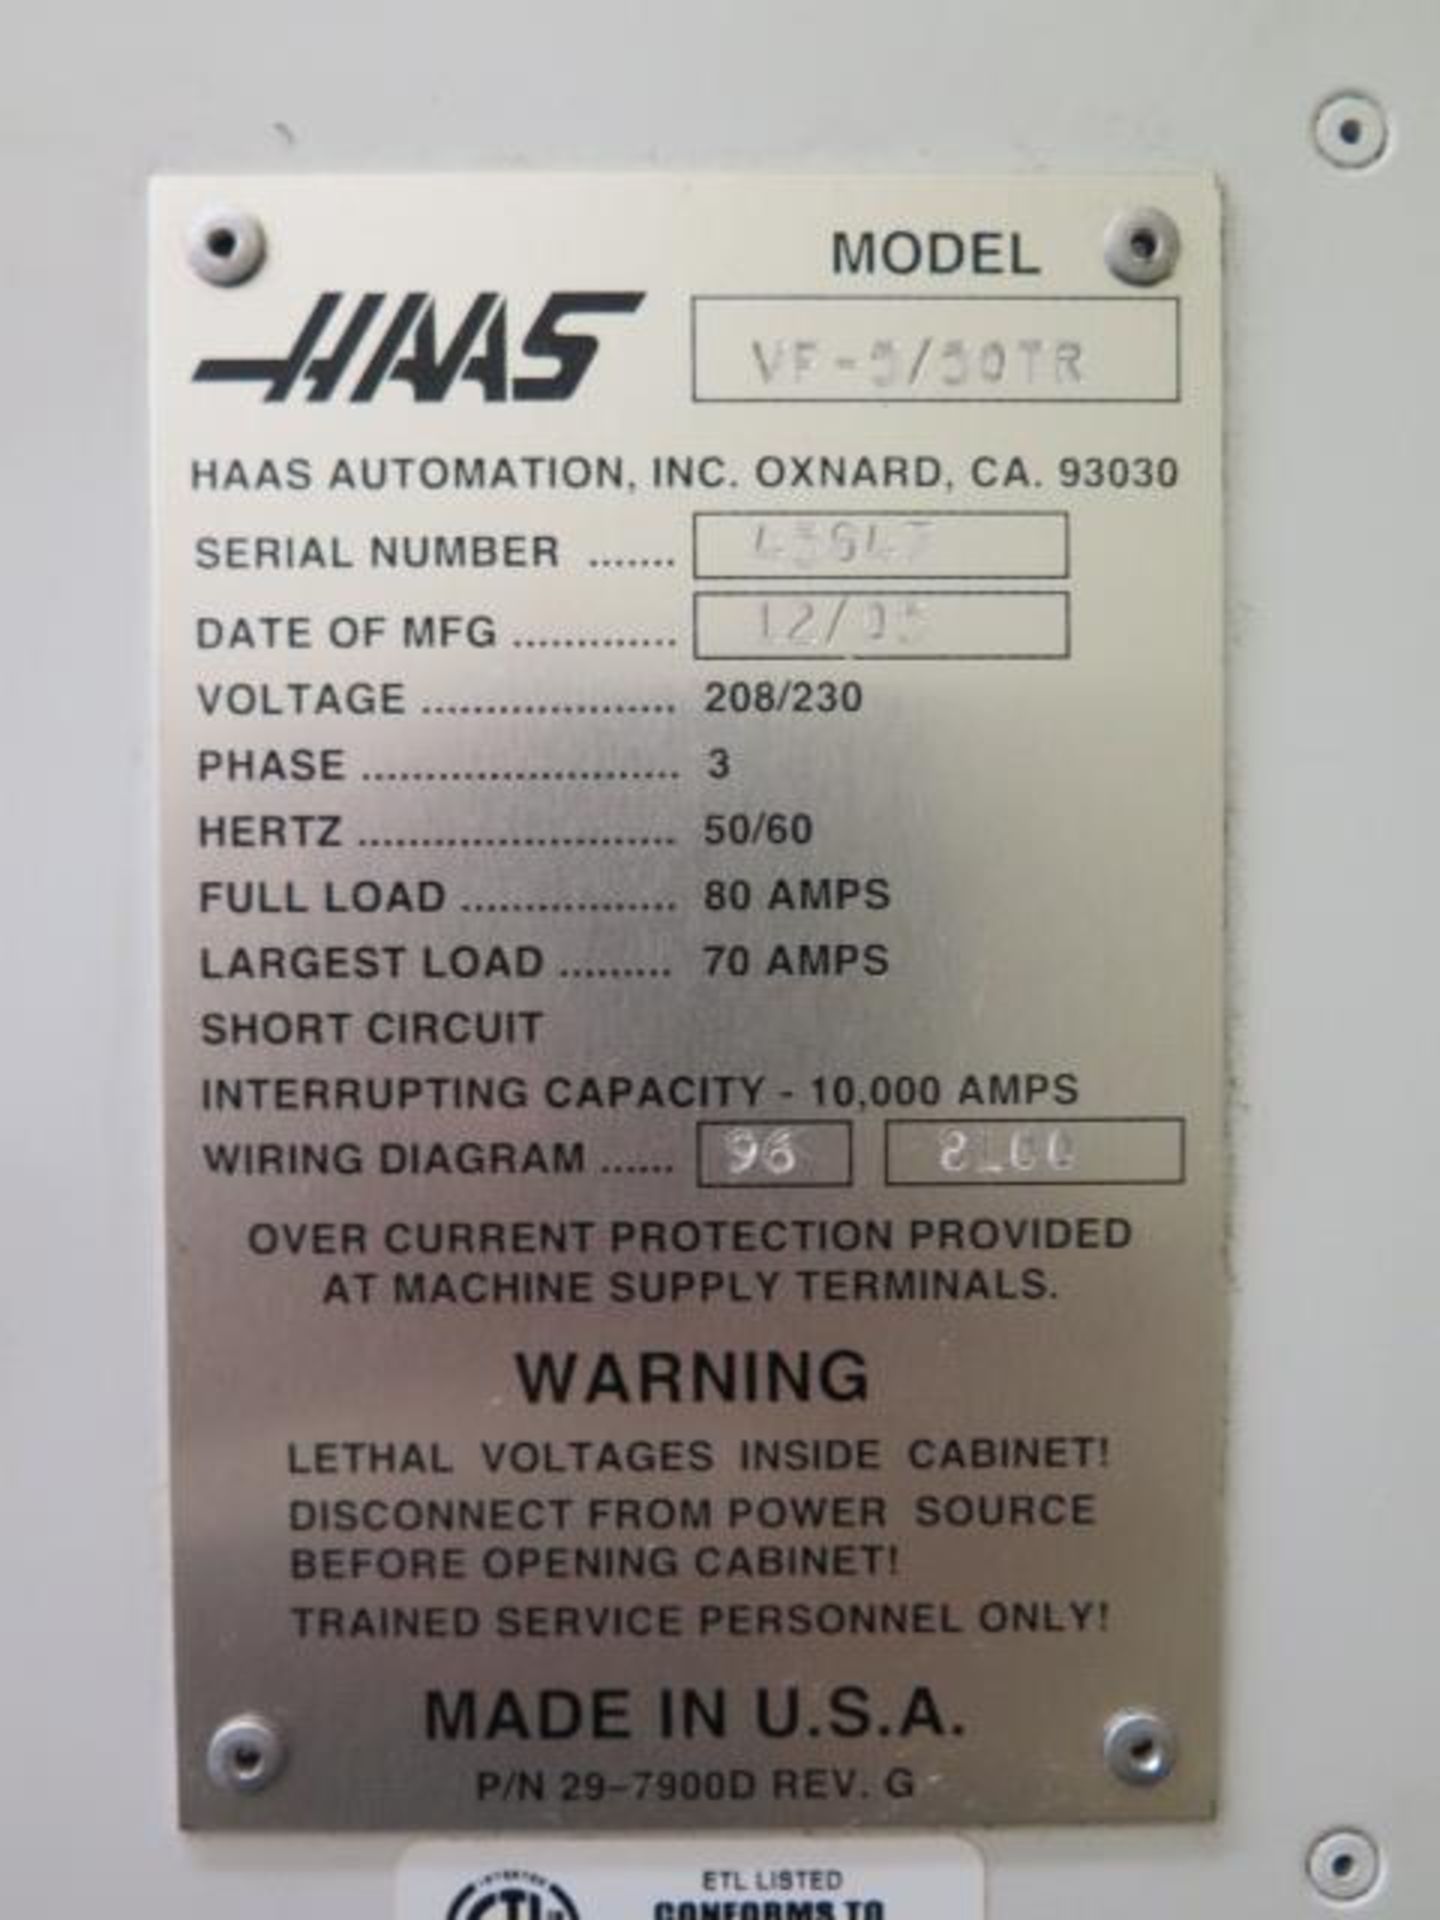 2005 Haas VF5/50TR 5-Axis Trunnion CNC VMC s/n 45847 w/ Haas Controls, 30-Station ATC, SOLD AS IS - Image 24 of 24